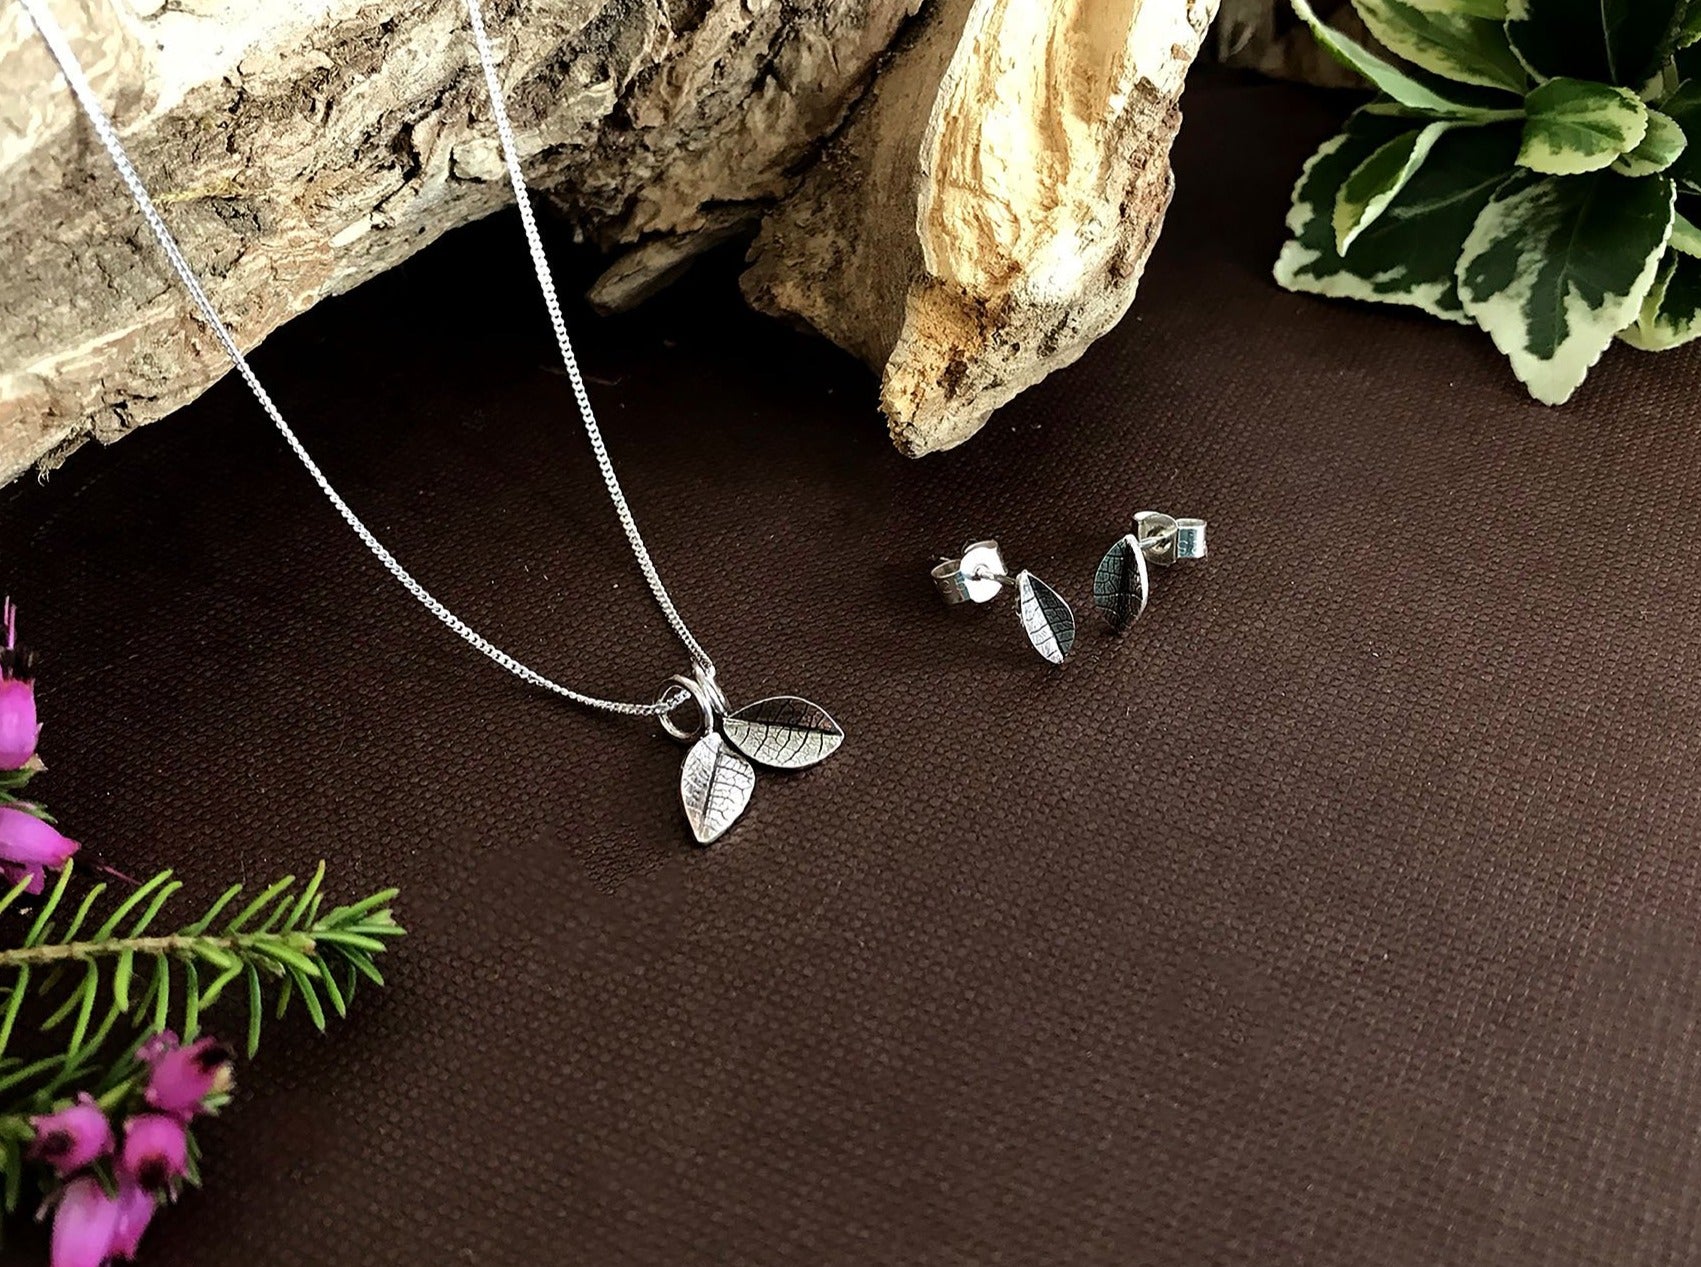 Twin Silver Leaf Necklace and Leaf Stud Earring Set by Curious Magpie Jewellery